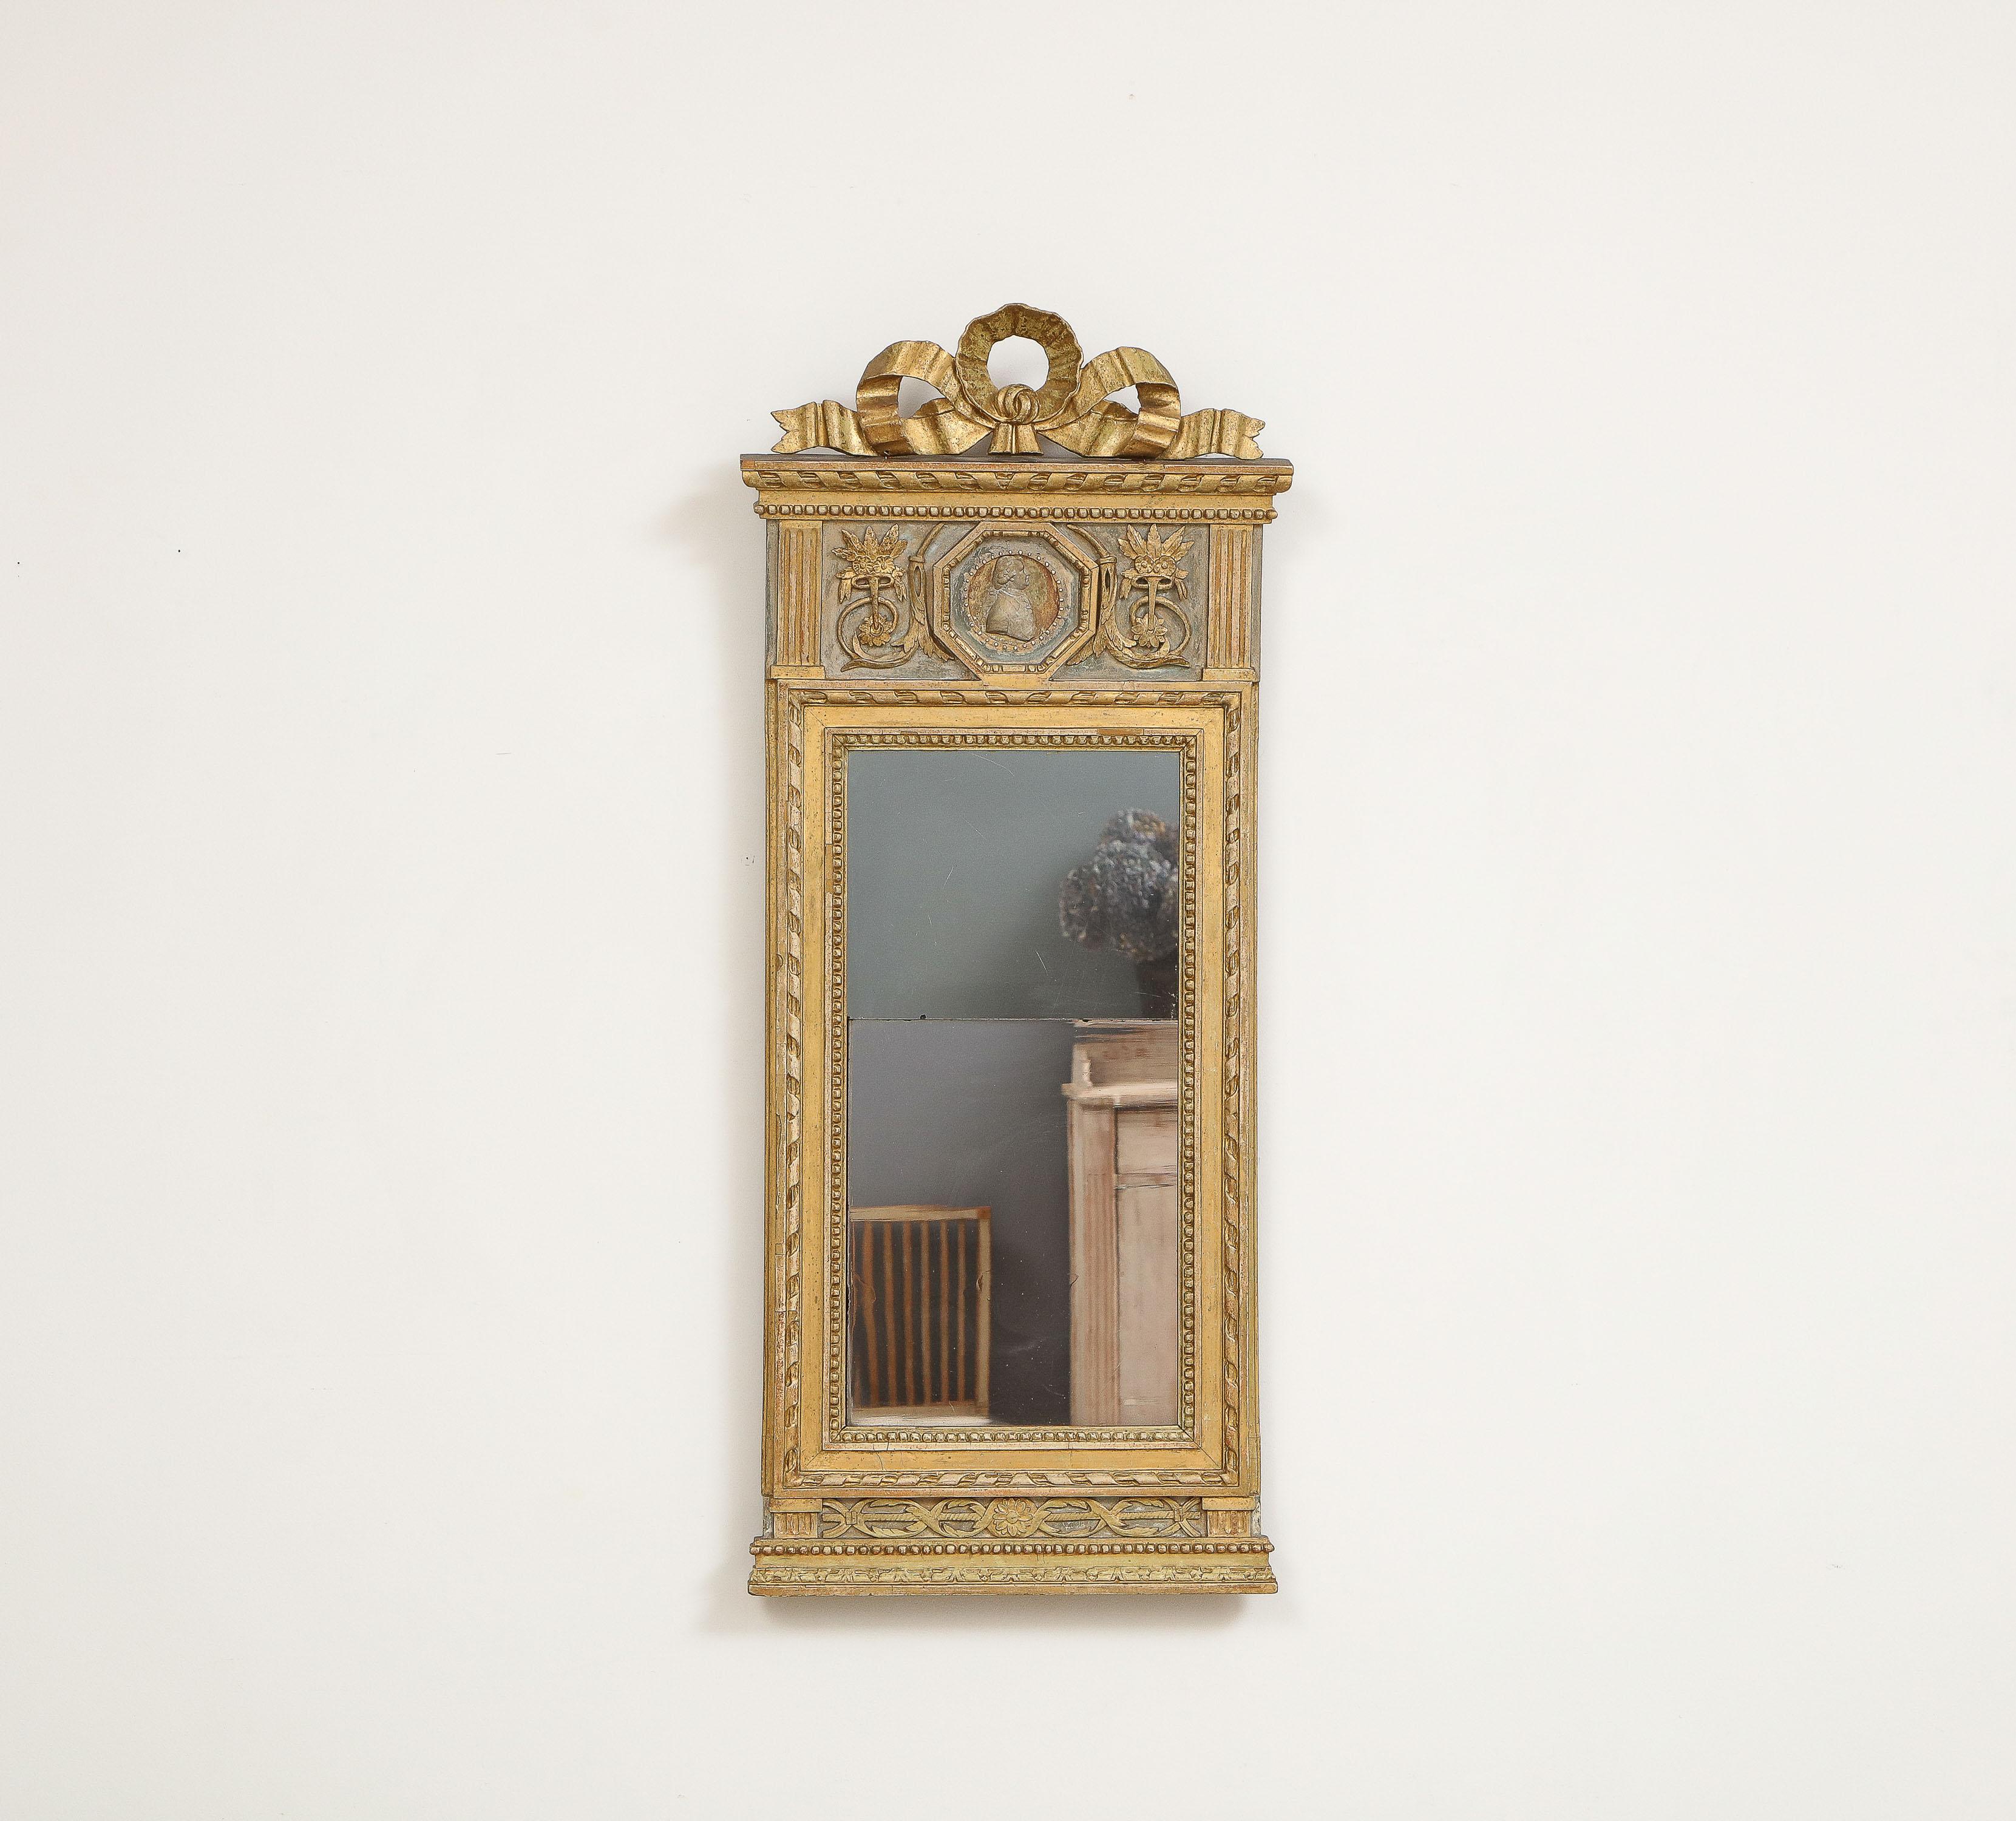 Eric Wahlberg (1760 Stockholm, Sweden 1811), 18th century Gustavian mirror with center cameo, origin: Stockholm, Sweden, hallmarked and stamped on verso: Eric Wahlberg and Lago Lunden with the Stockholm Hallstämpel

References: Speglar: Spegelmakare